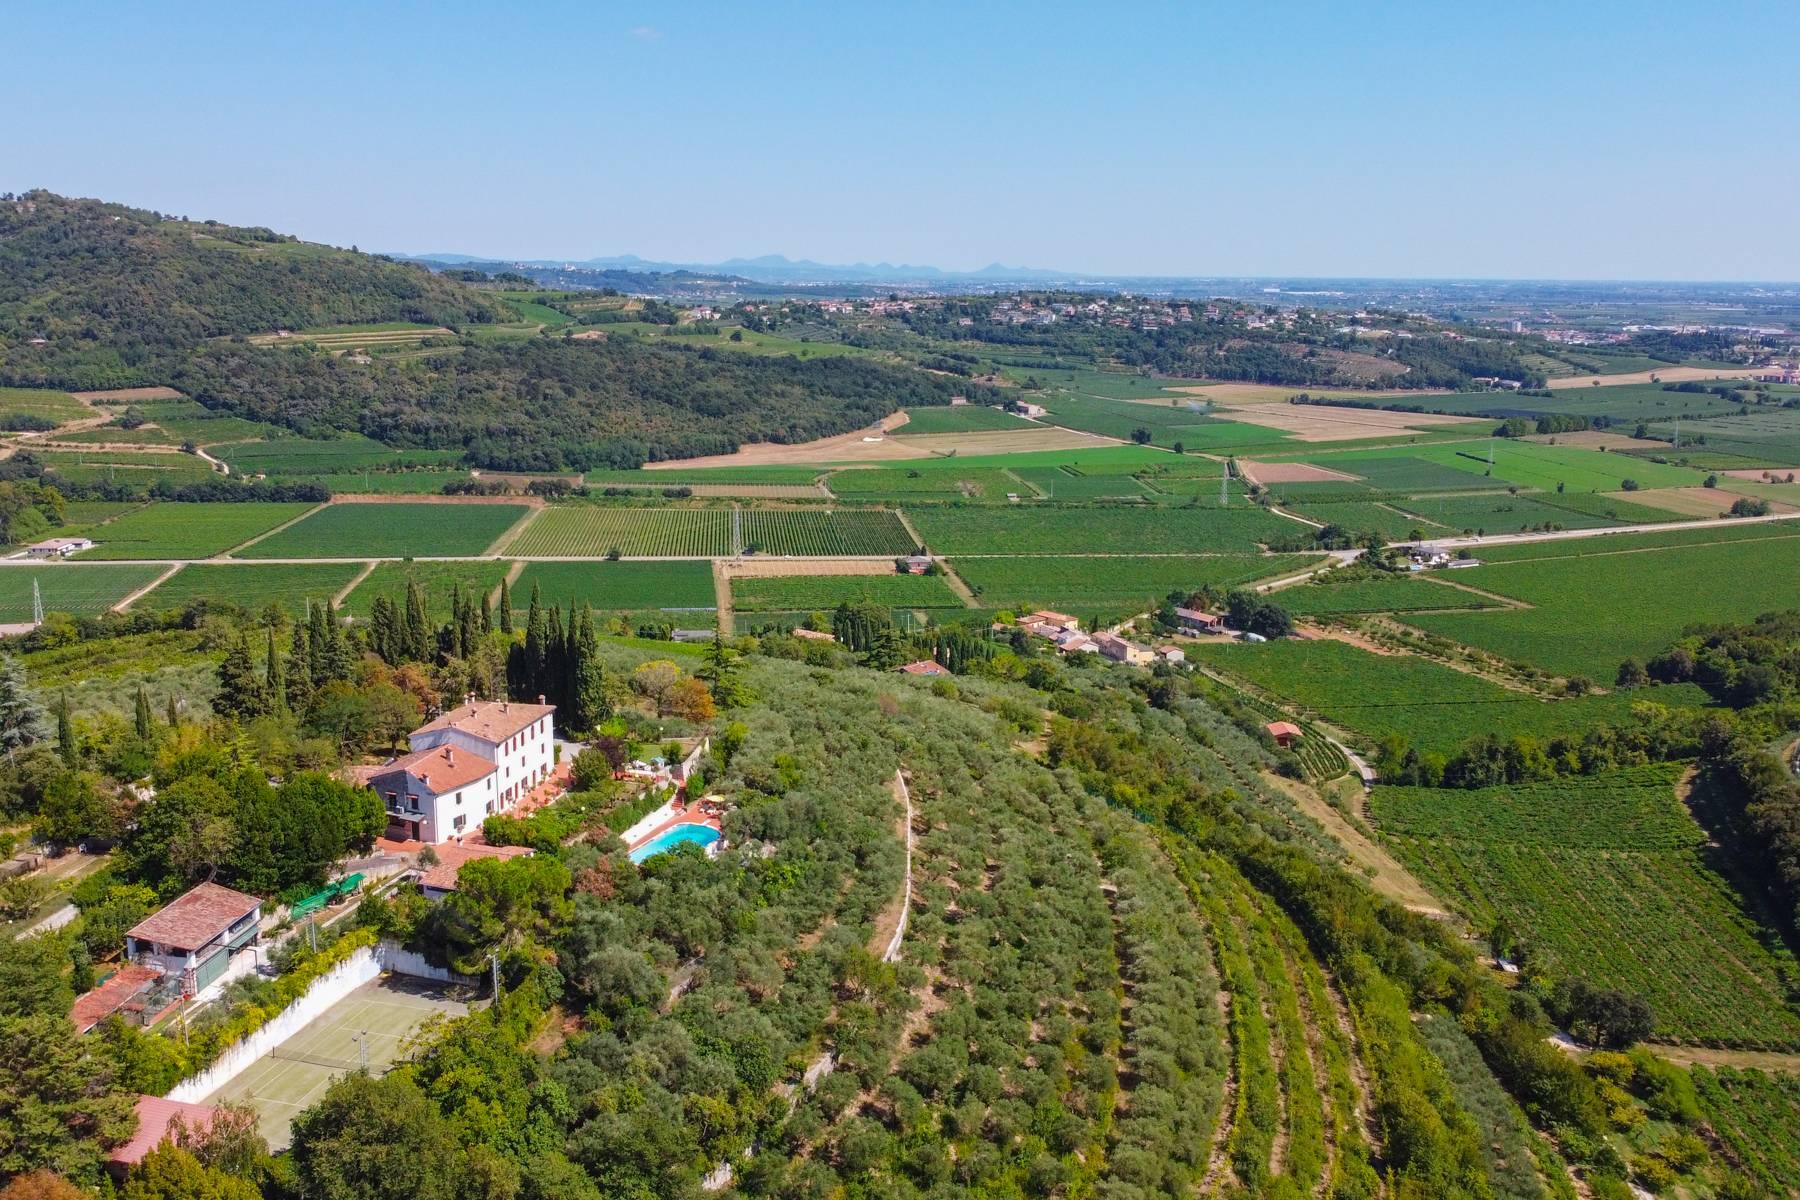 Historic country villa with swimming pool, tennis court and estate on the hills of Verona - 3